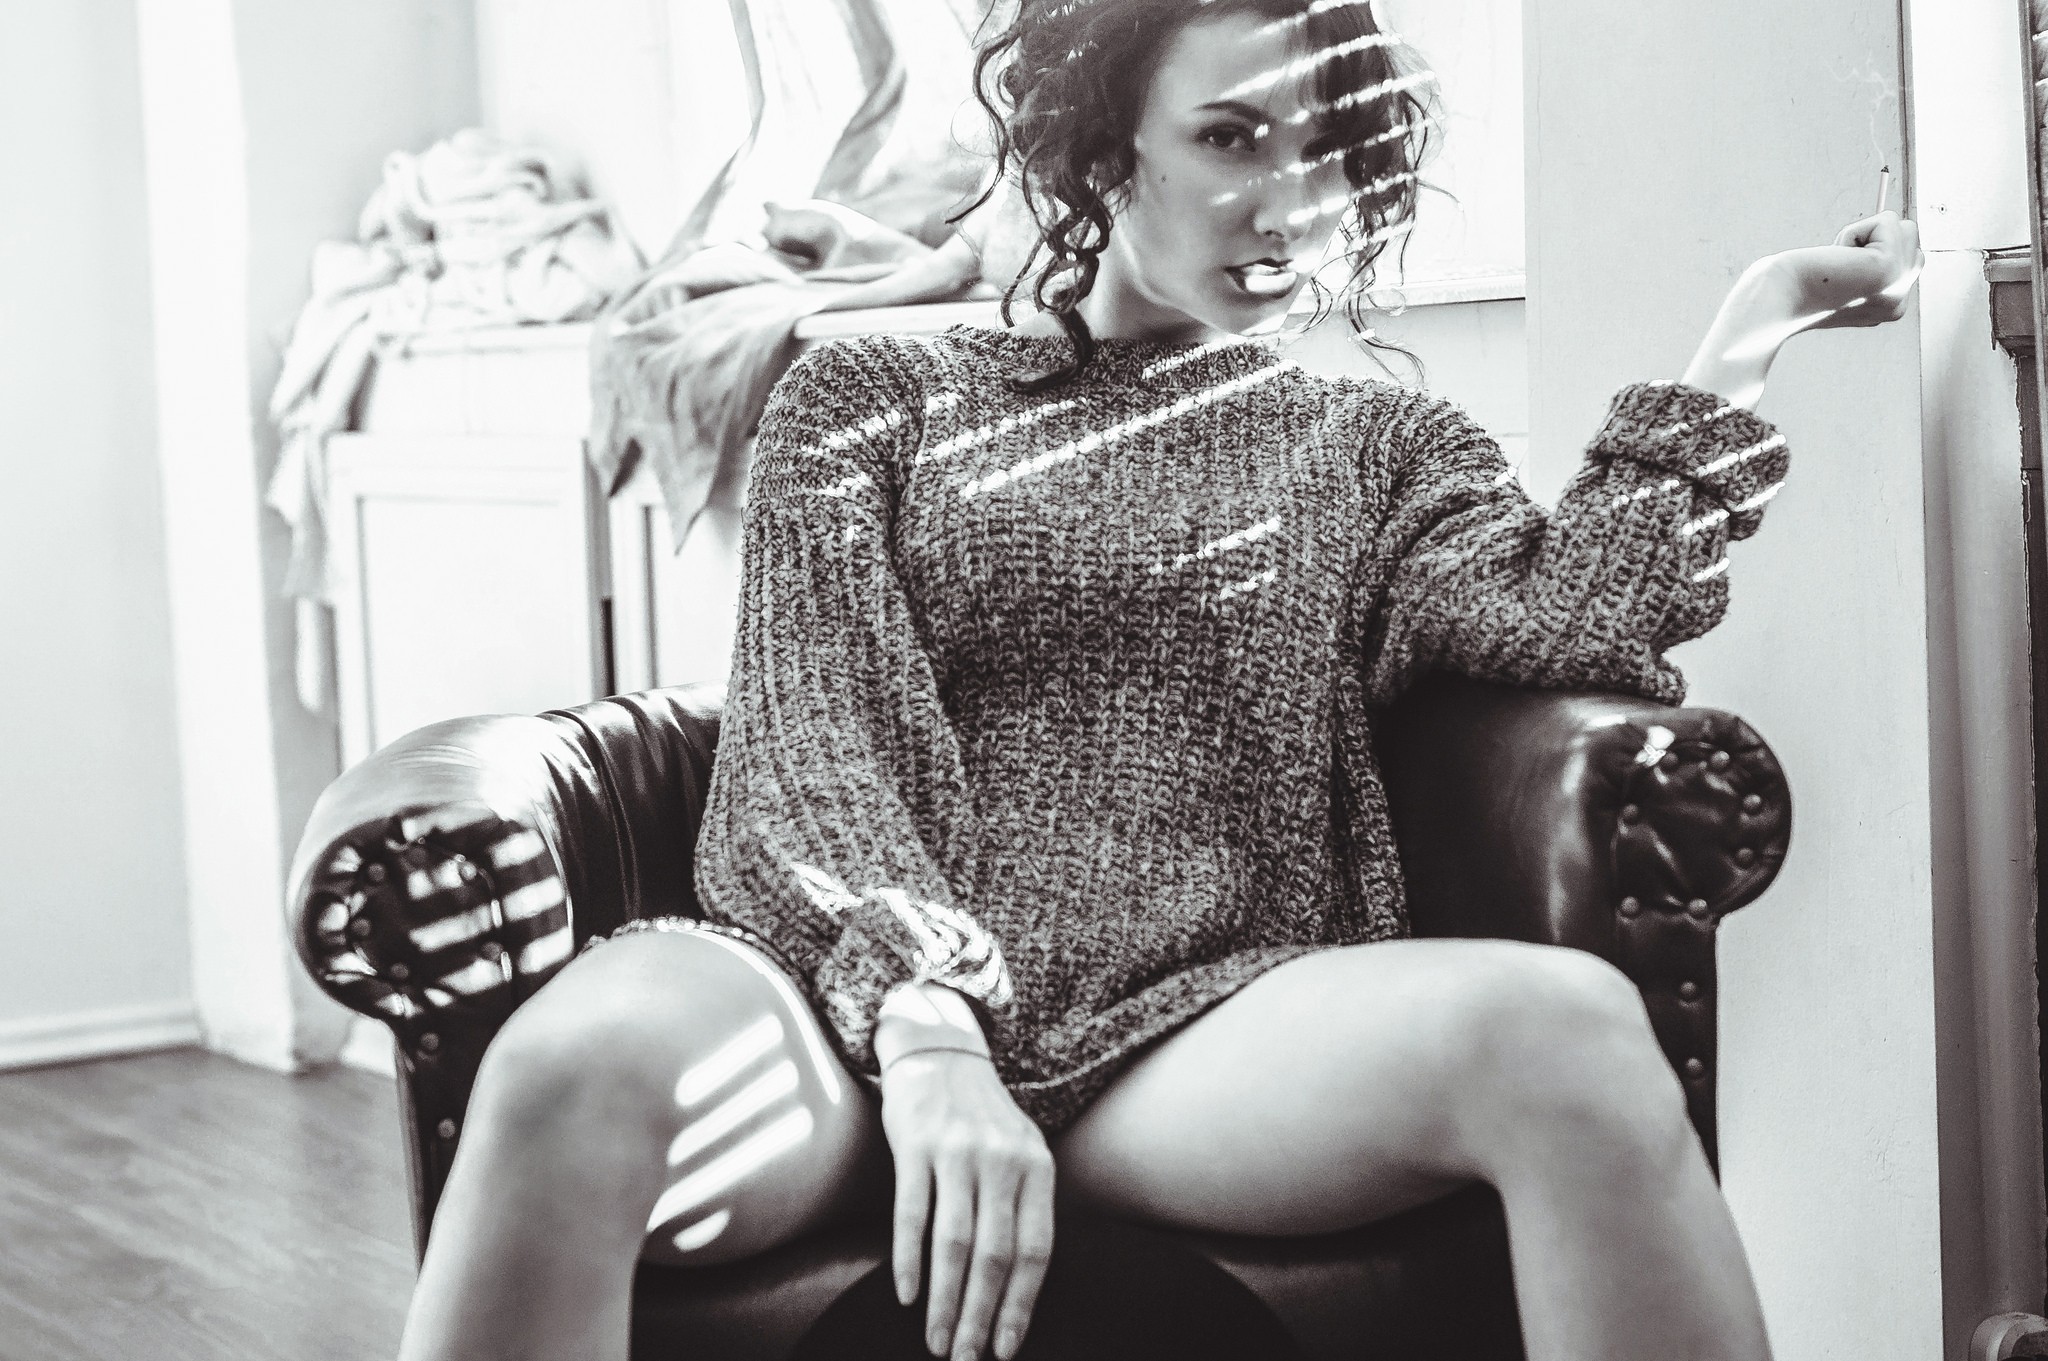 Women Monochrome Curly Hair Legs Wool Sweater Sitting Looking At Viewer Smoking Cigarettes 2048x1361